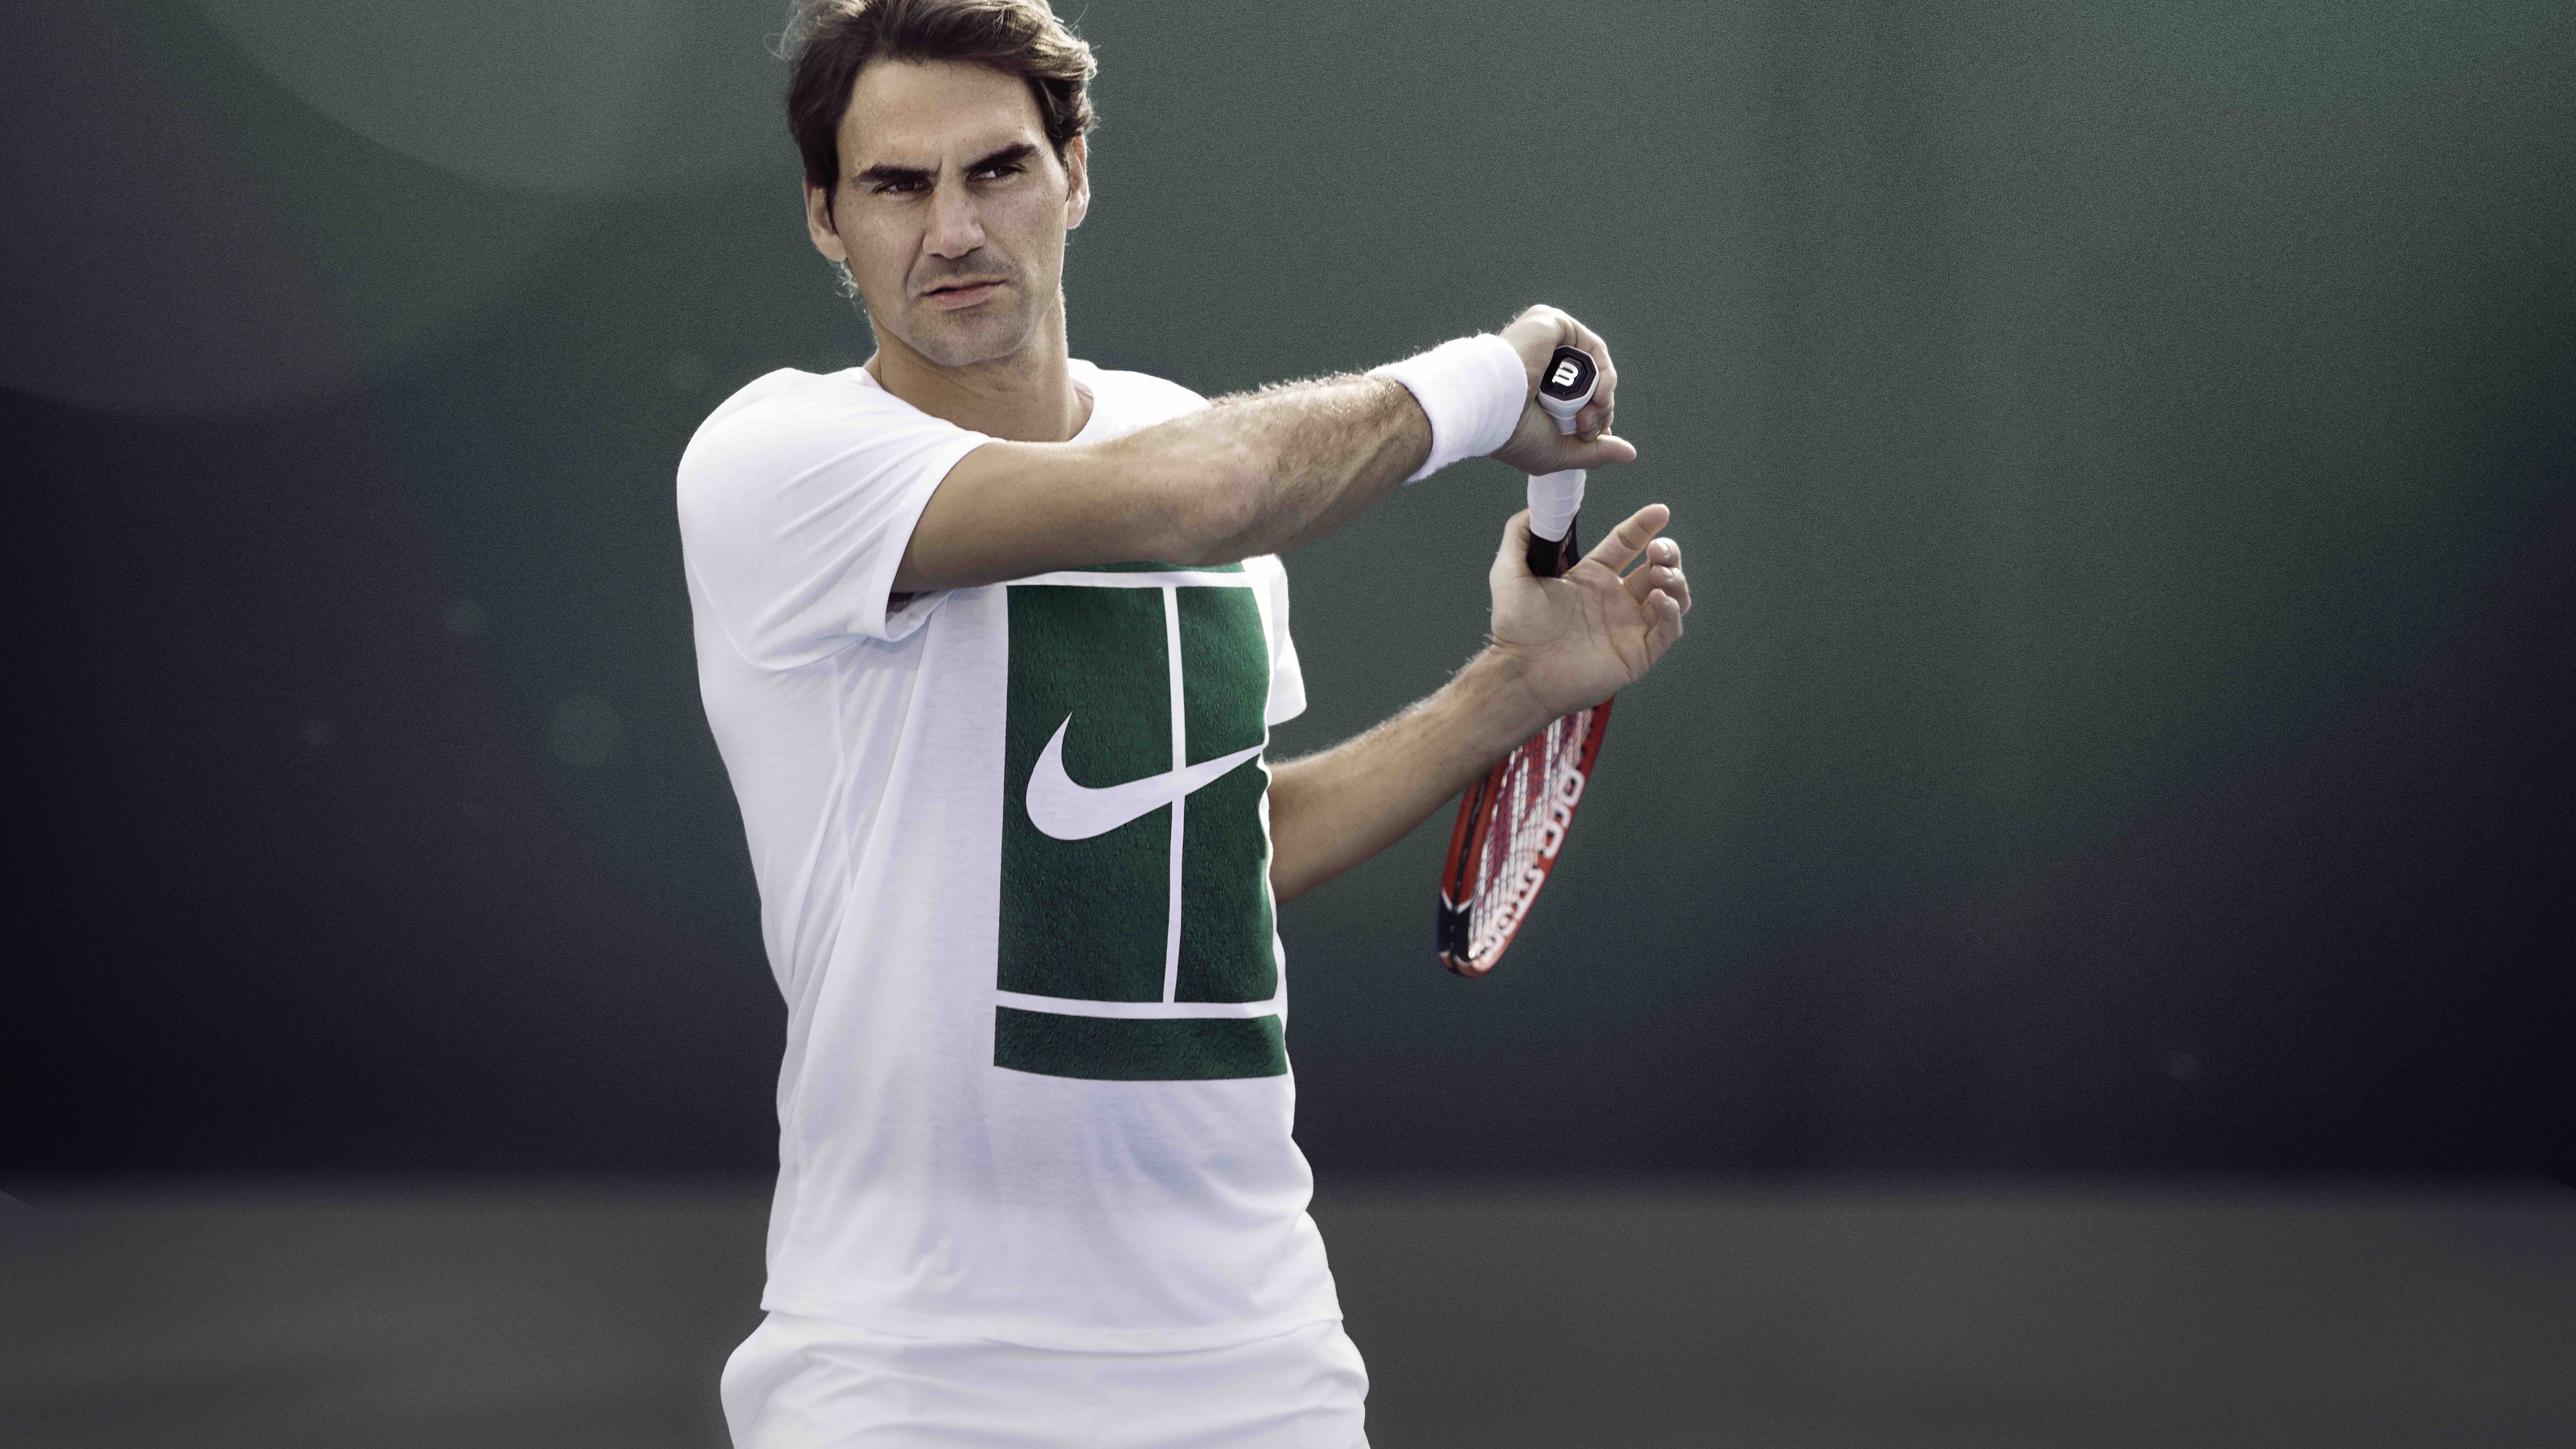 Roger Federer Tennis Player 8k HD 4k Wallpaper, Image, Background, Photo and Picture